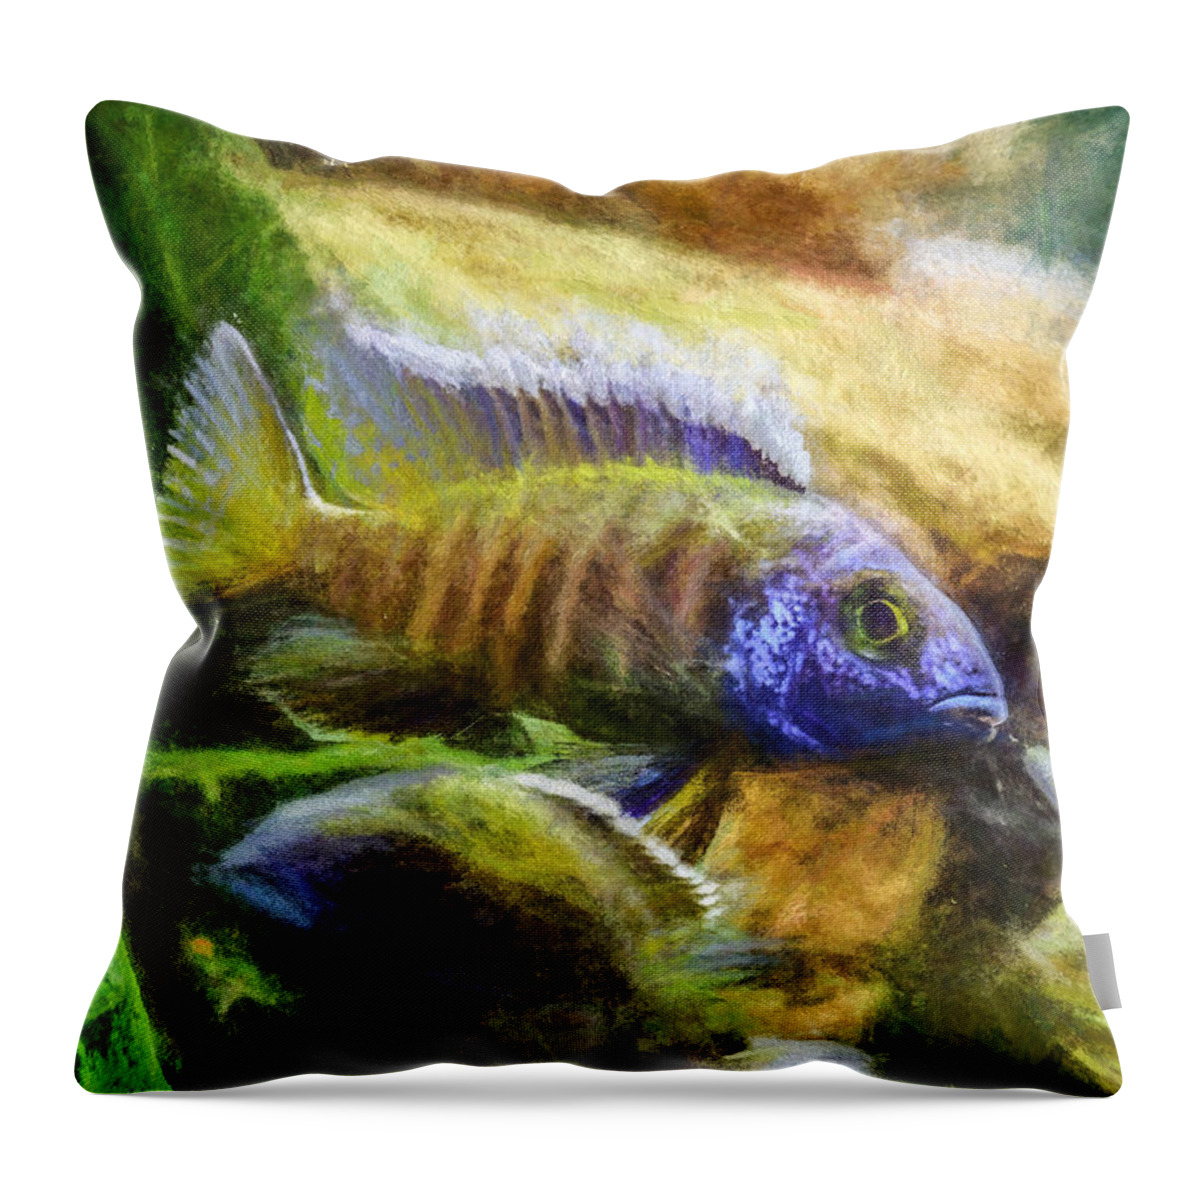 African Cichlid Throw Pillow featuring the digital art Amazing Peacock Cichlid by Don Northup